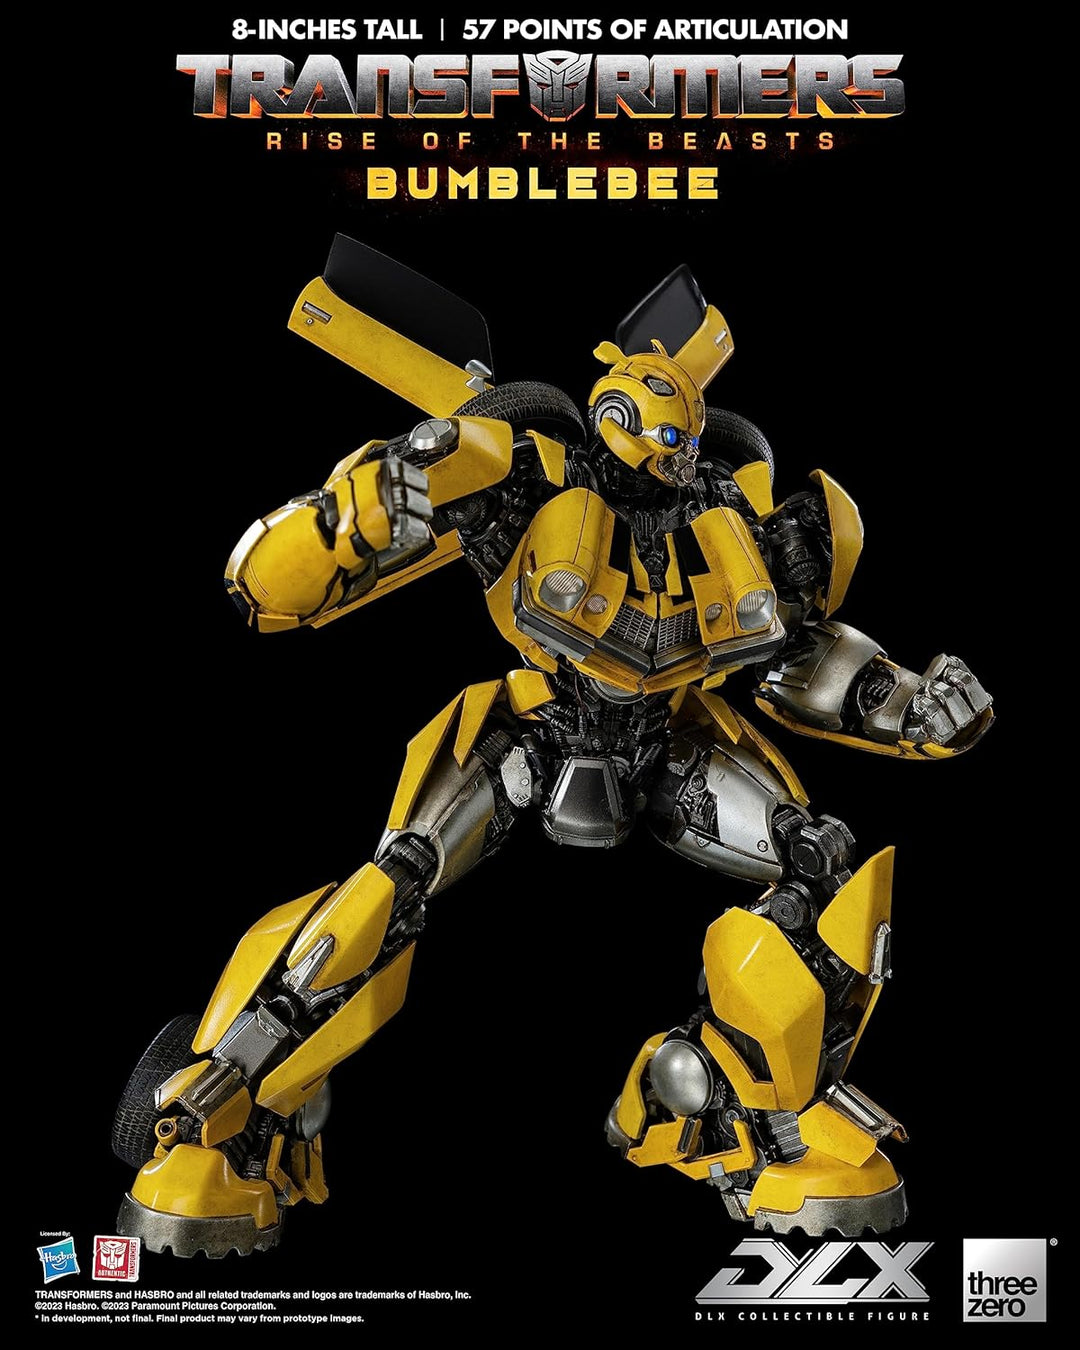 Transformers Rise of the Beasts DLX 1/6 Scale Bumblebee Figure